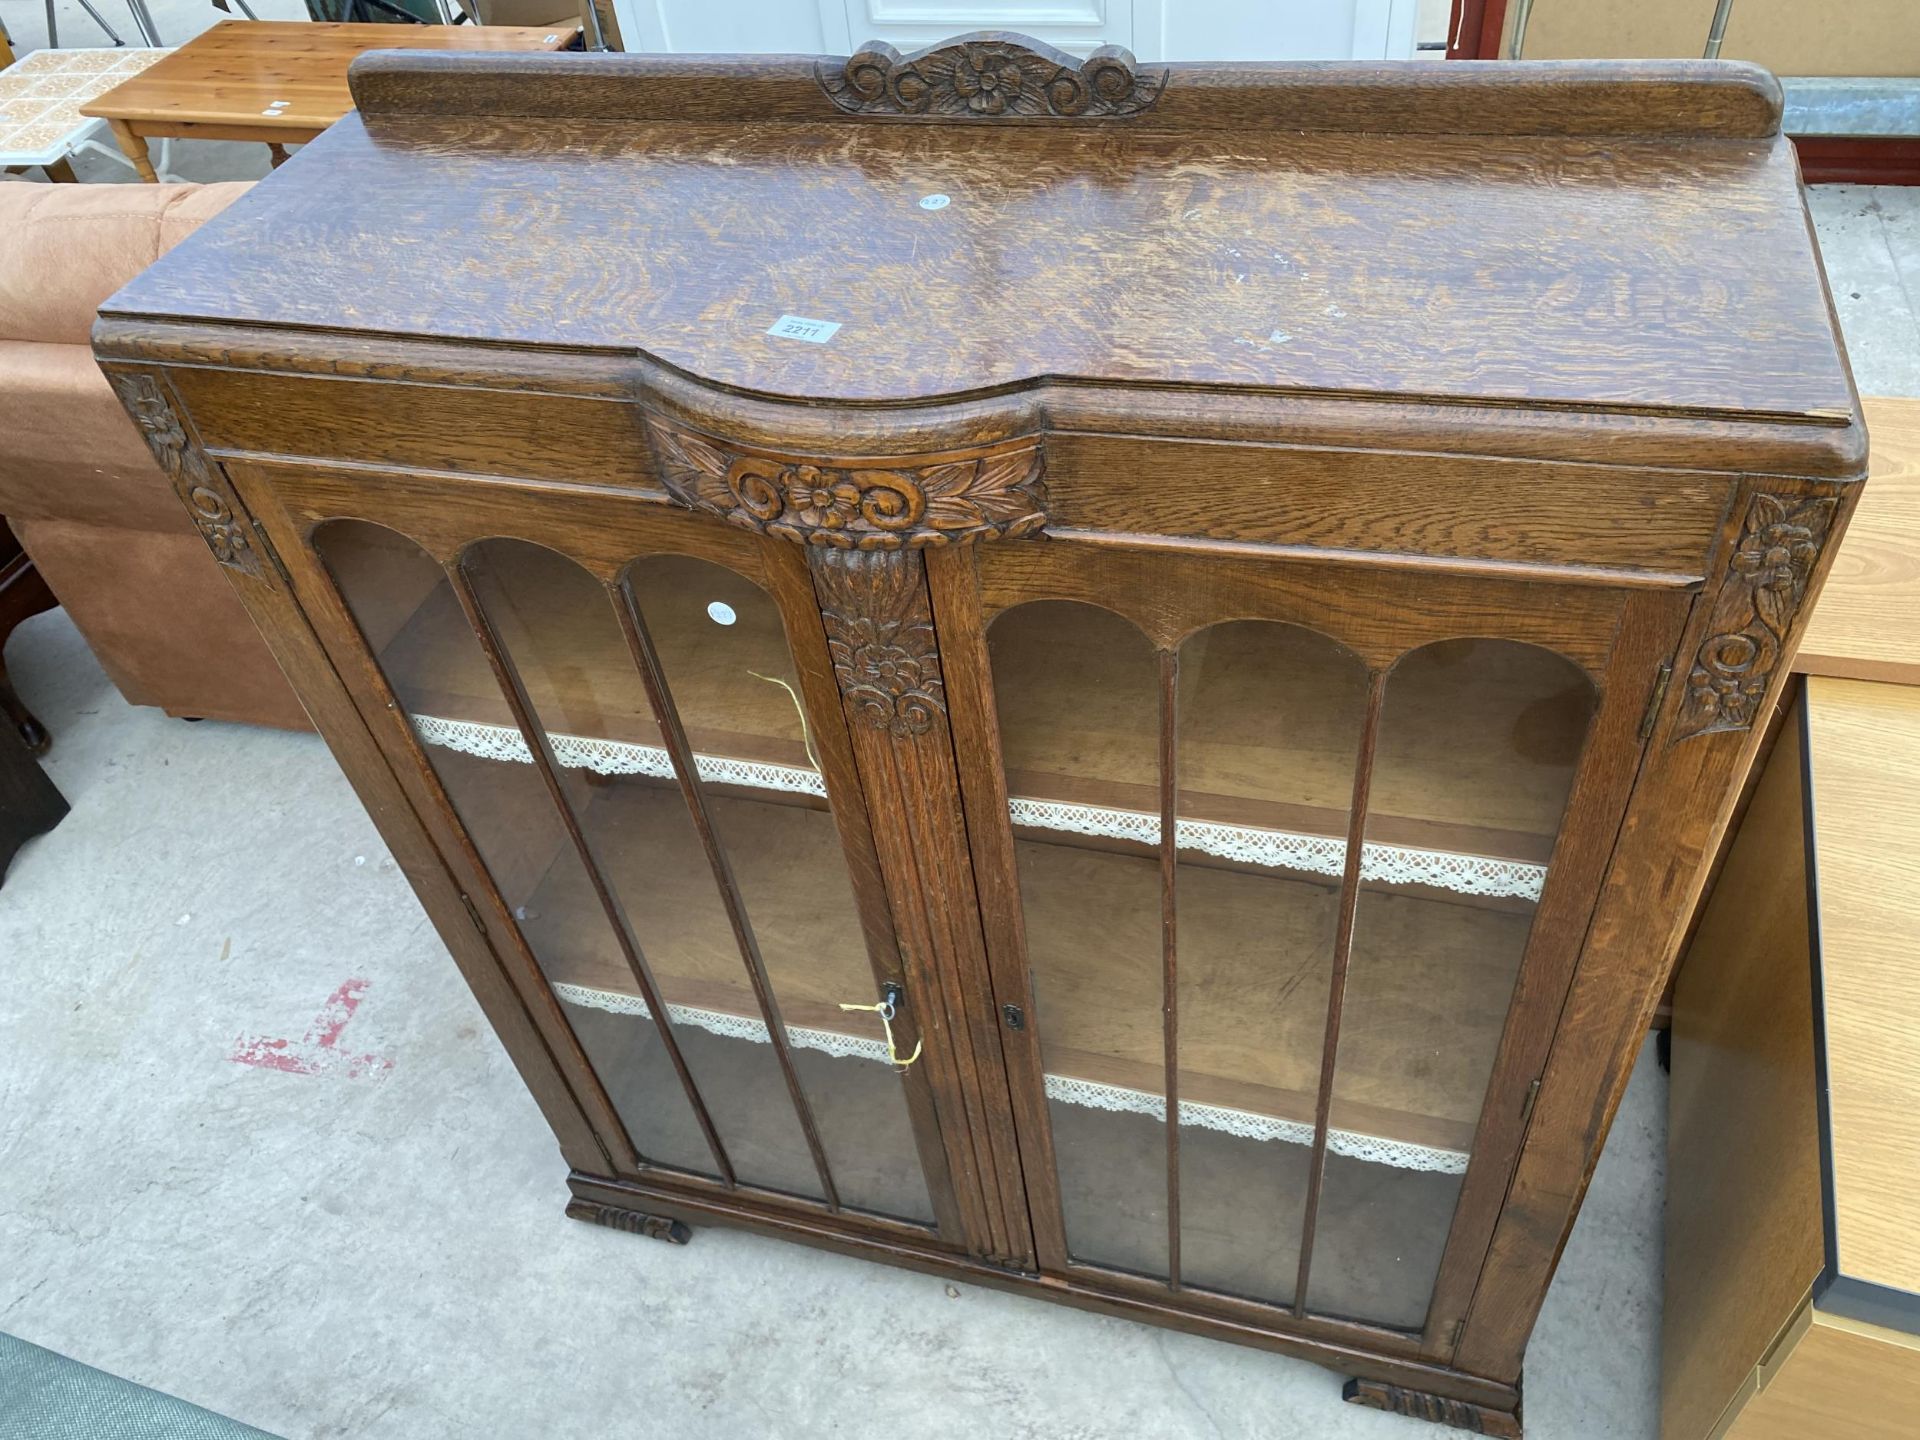 AN EARLY 20TH CENTURY OAK TWO DOOR DISPLAY CABINET, 40" WIDE - Image 2 of 4